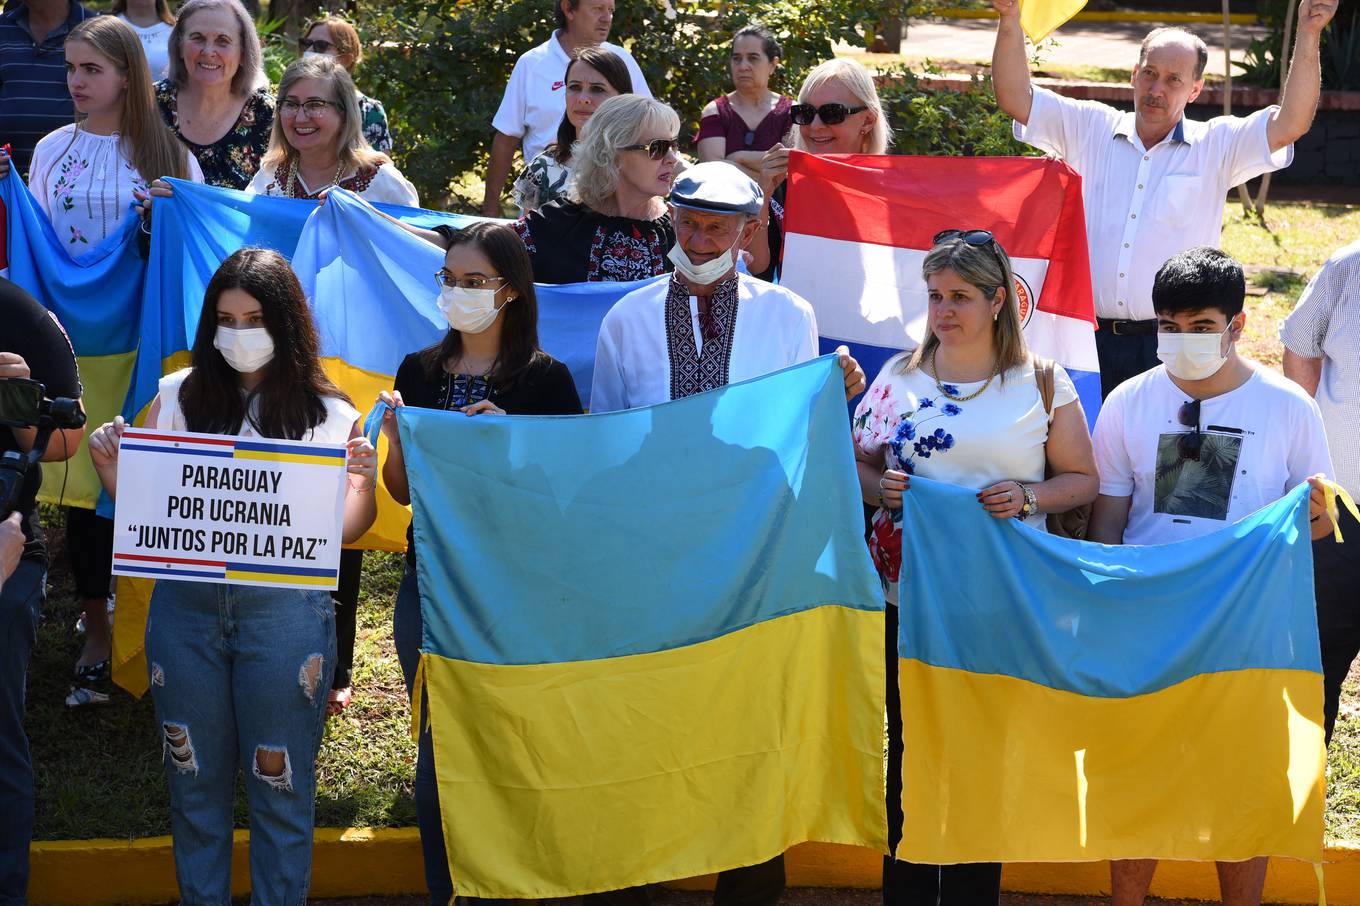 Members of the Ukrainian collectivity participate in a protest against the war and in support of Ukraine at the Plaza de Armas in Encarnacion, Paraguay, on February 26, 2022. - Russian President Vladimir Putin launched a full-scale invasion of Ukraine on Thursday, unleashing air strikes and ordering ground troops across the border in fighting that Ukrainian authorities said left dozens of people dead. (Photo by NORBERTO DUARTE / AFP)